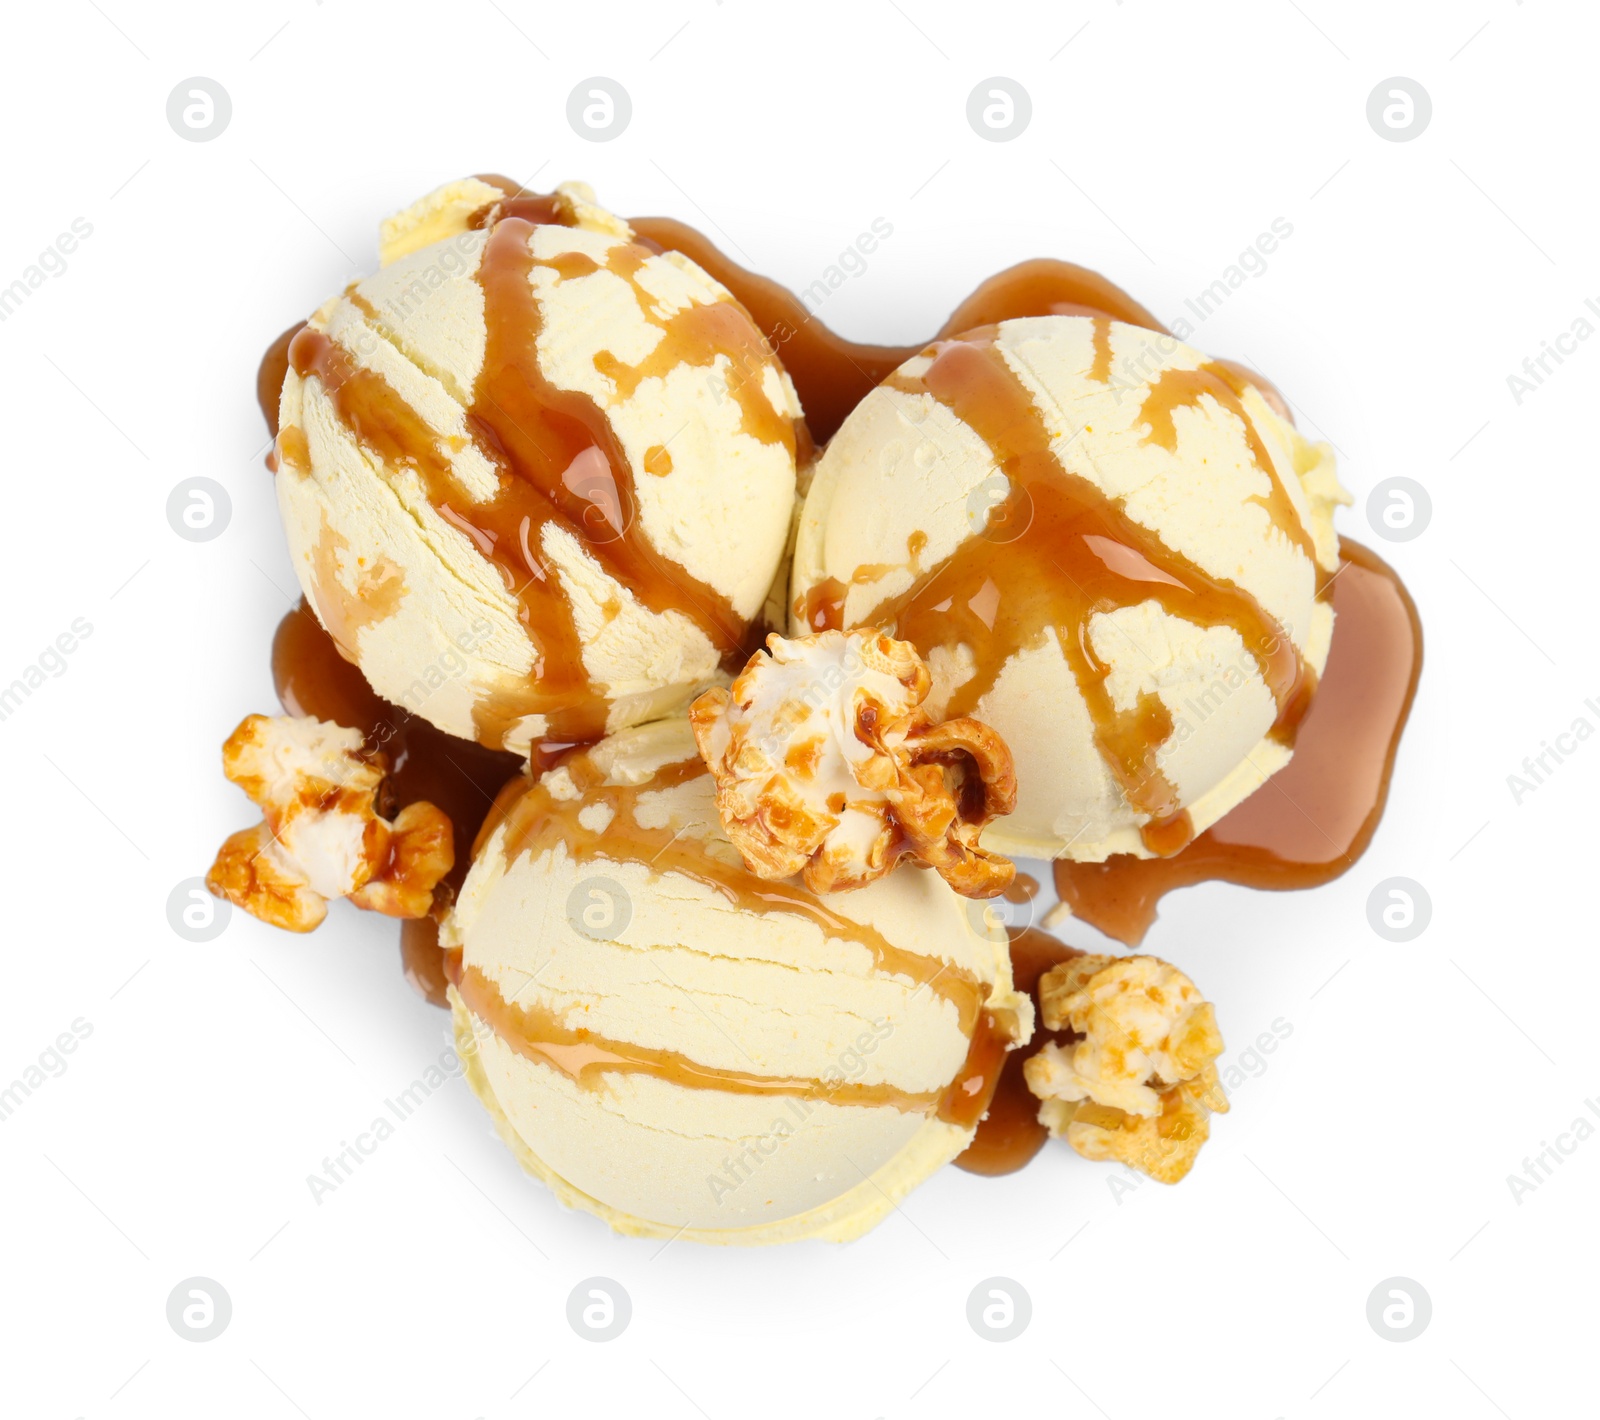 Photo of Delicious ice cream with caramel popcorn and sauce on white background, top view